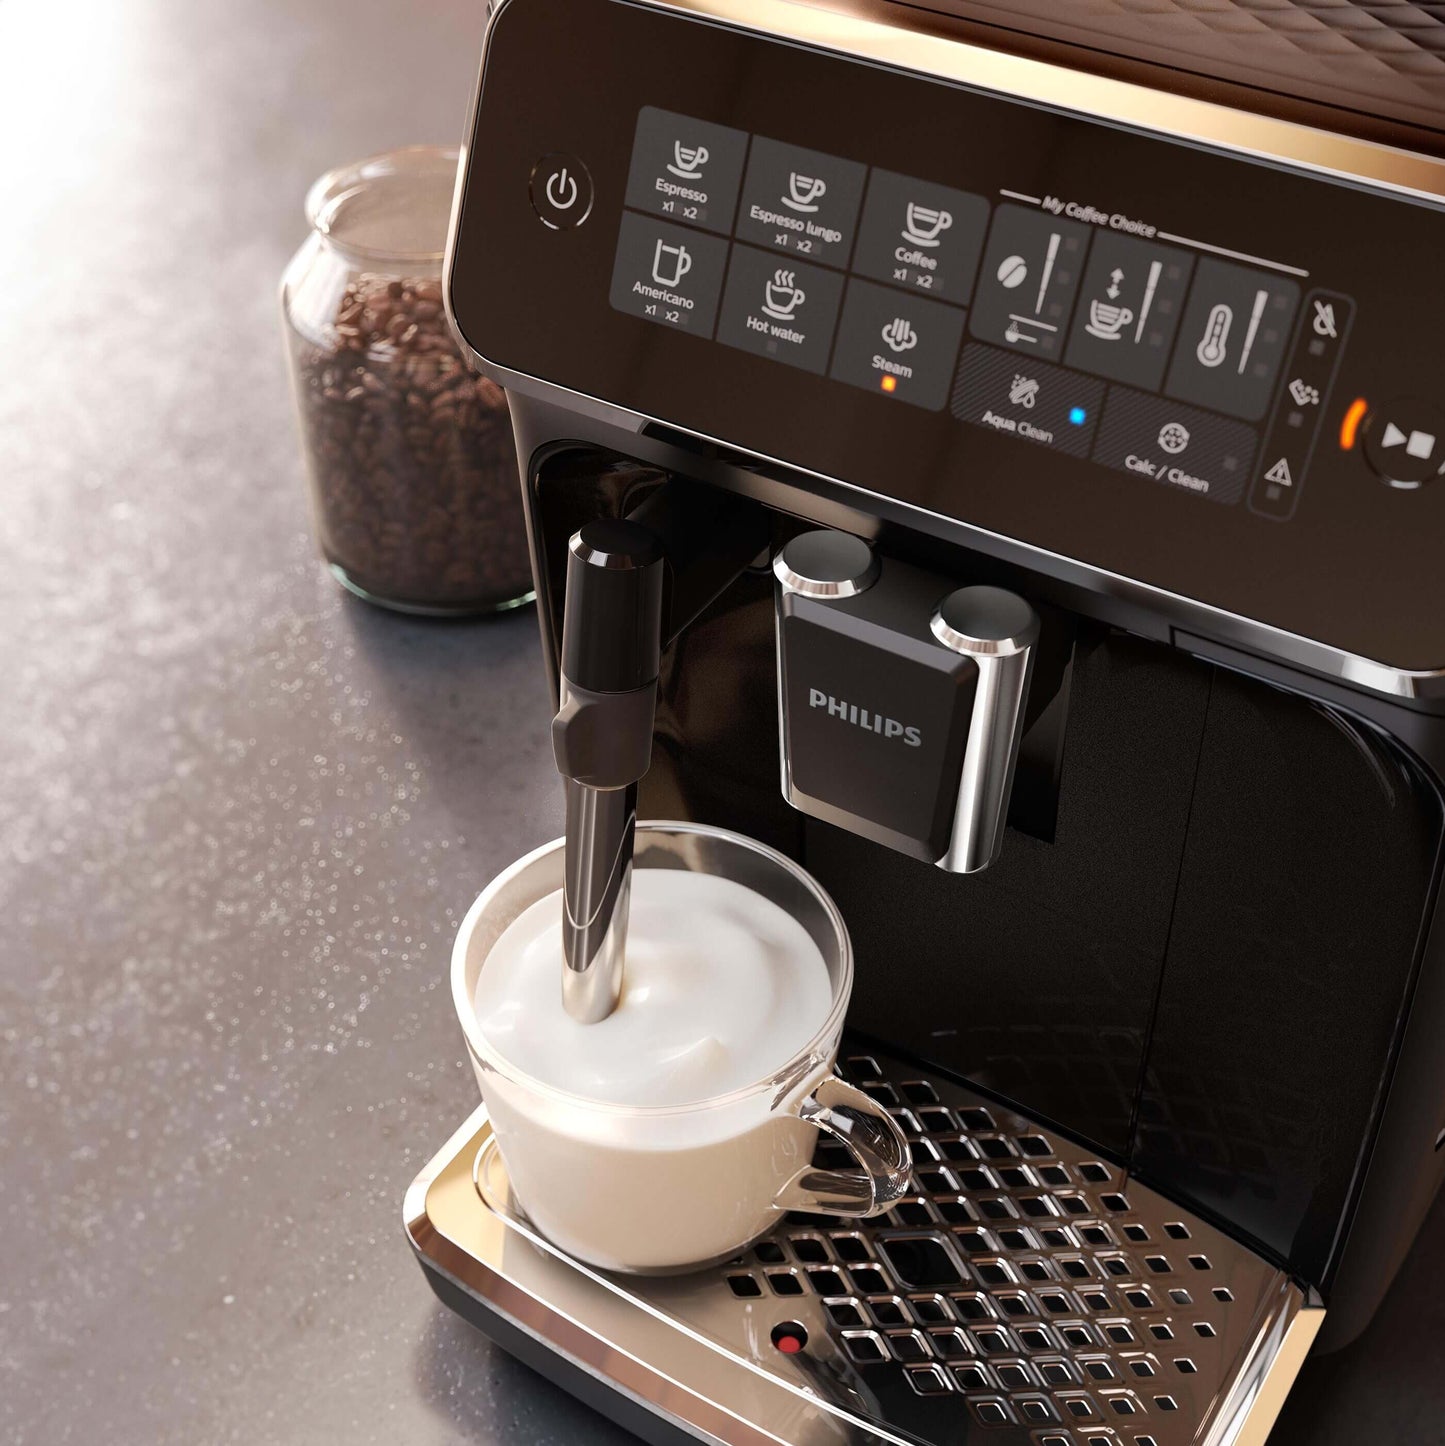 Philips 3200 Series Fully Automatic Espresso Machine - Classic Milk Frother